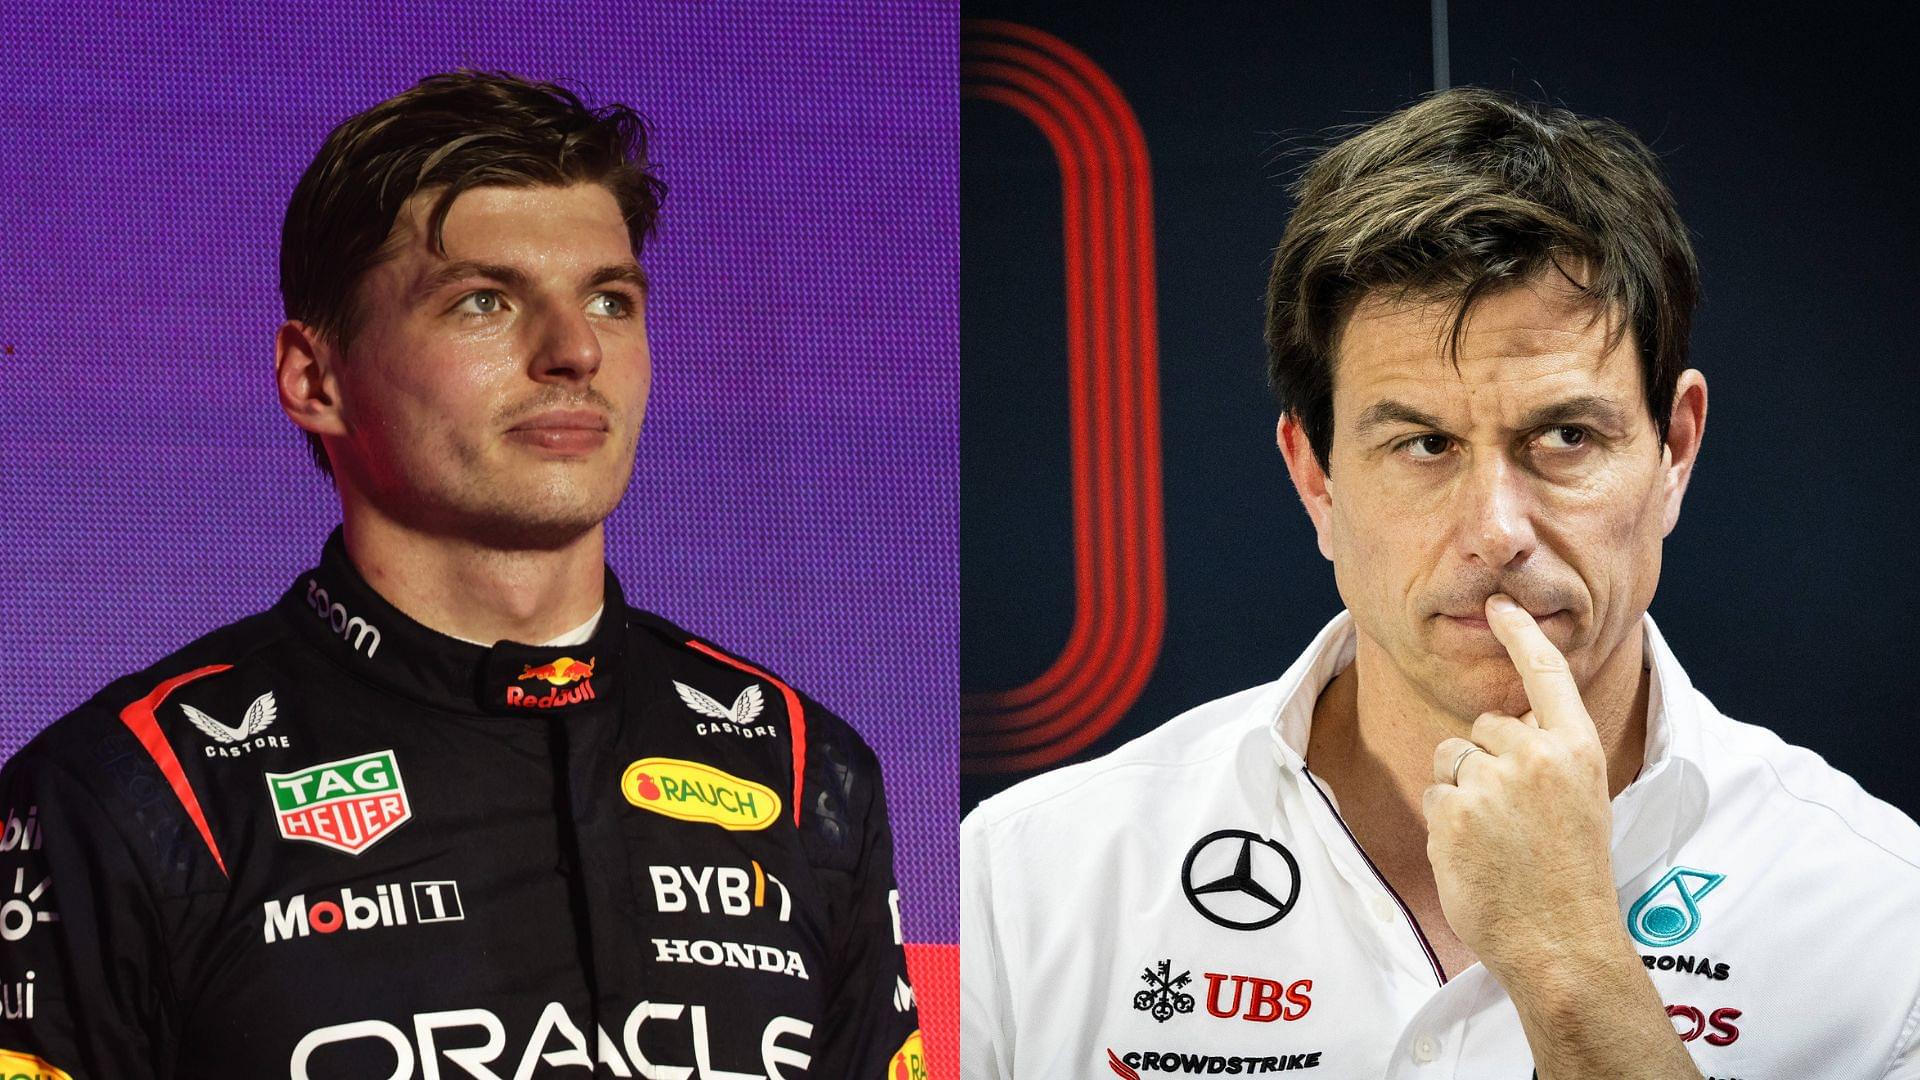 Mercedes-Benz’s CEO Joins Forces With Toto Wolff to Make Max Verstappen Intentions Clear